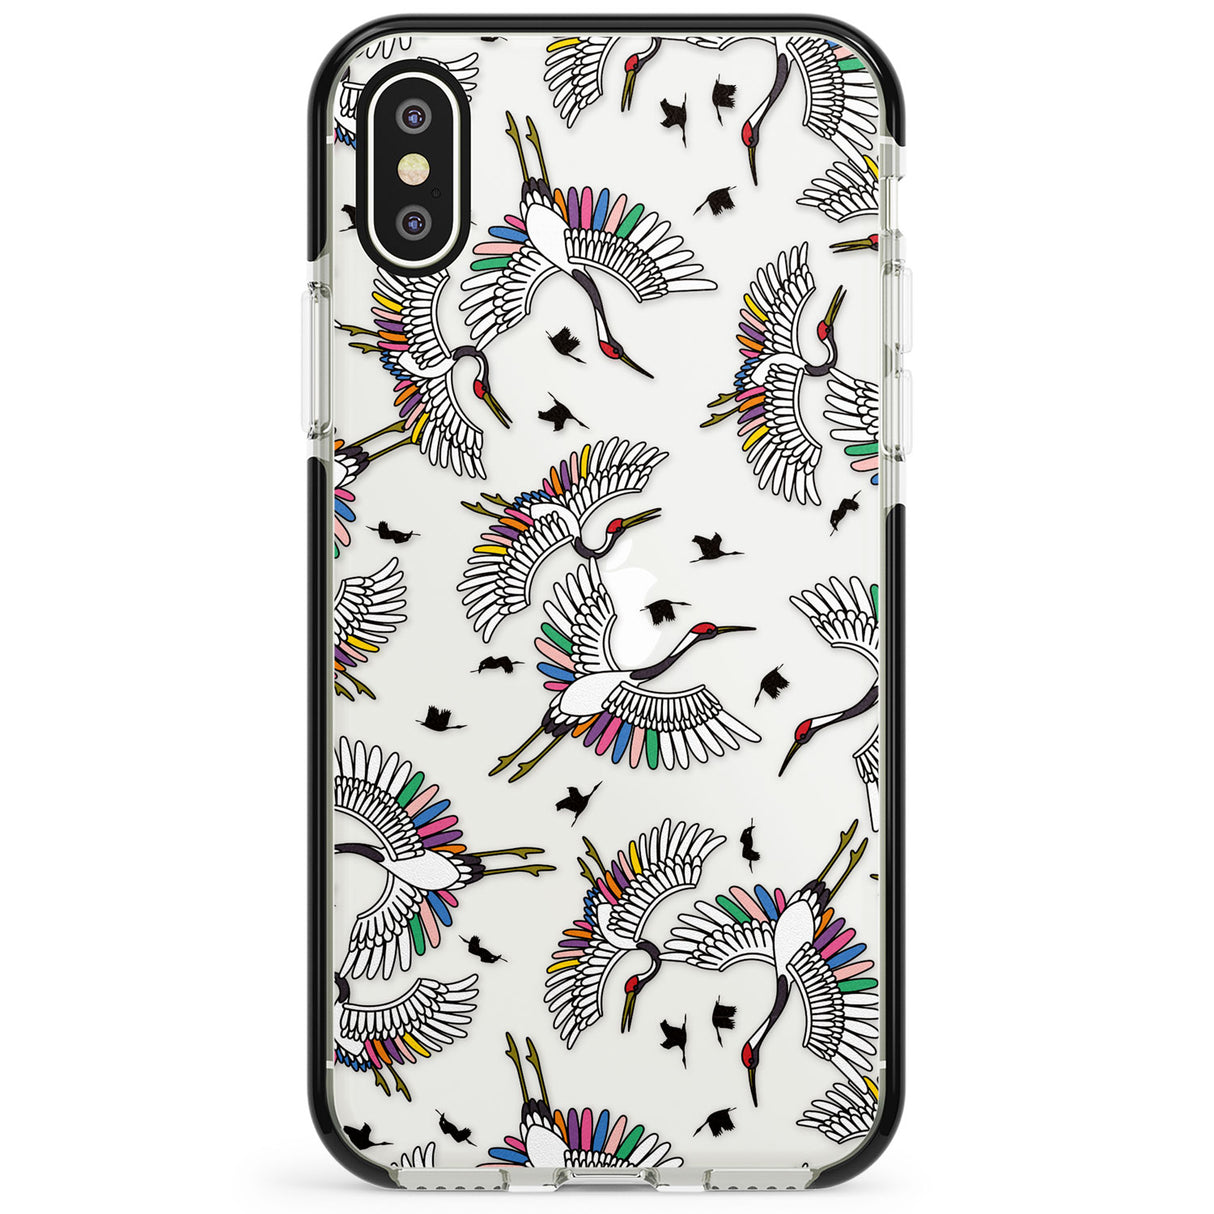 Colourful Crane Pattern Phone Case for iPhone X XS Max XR